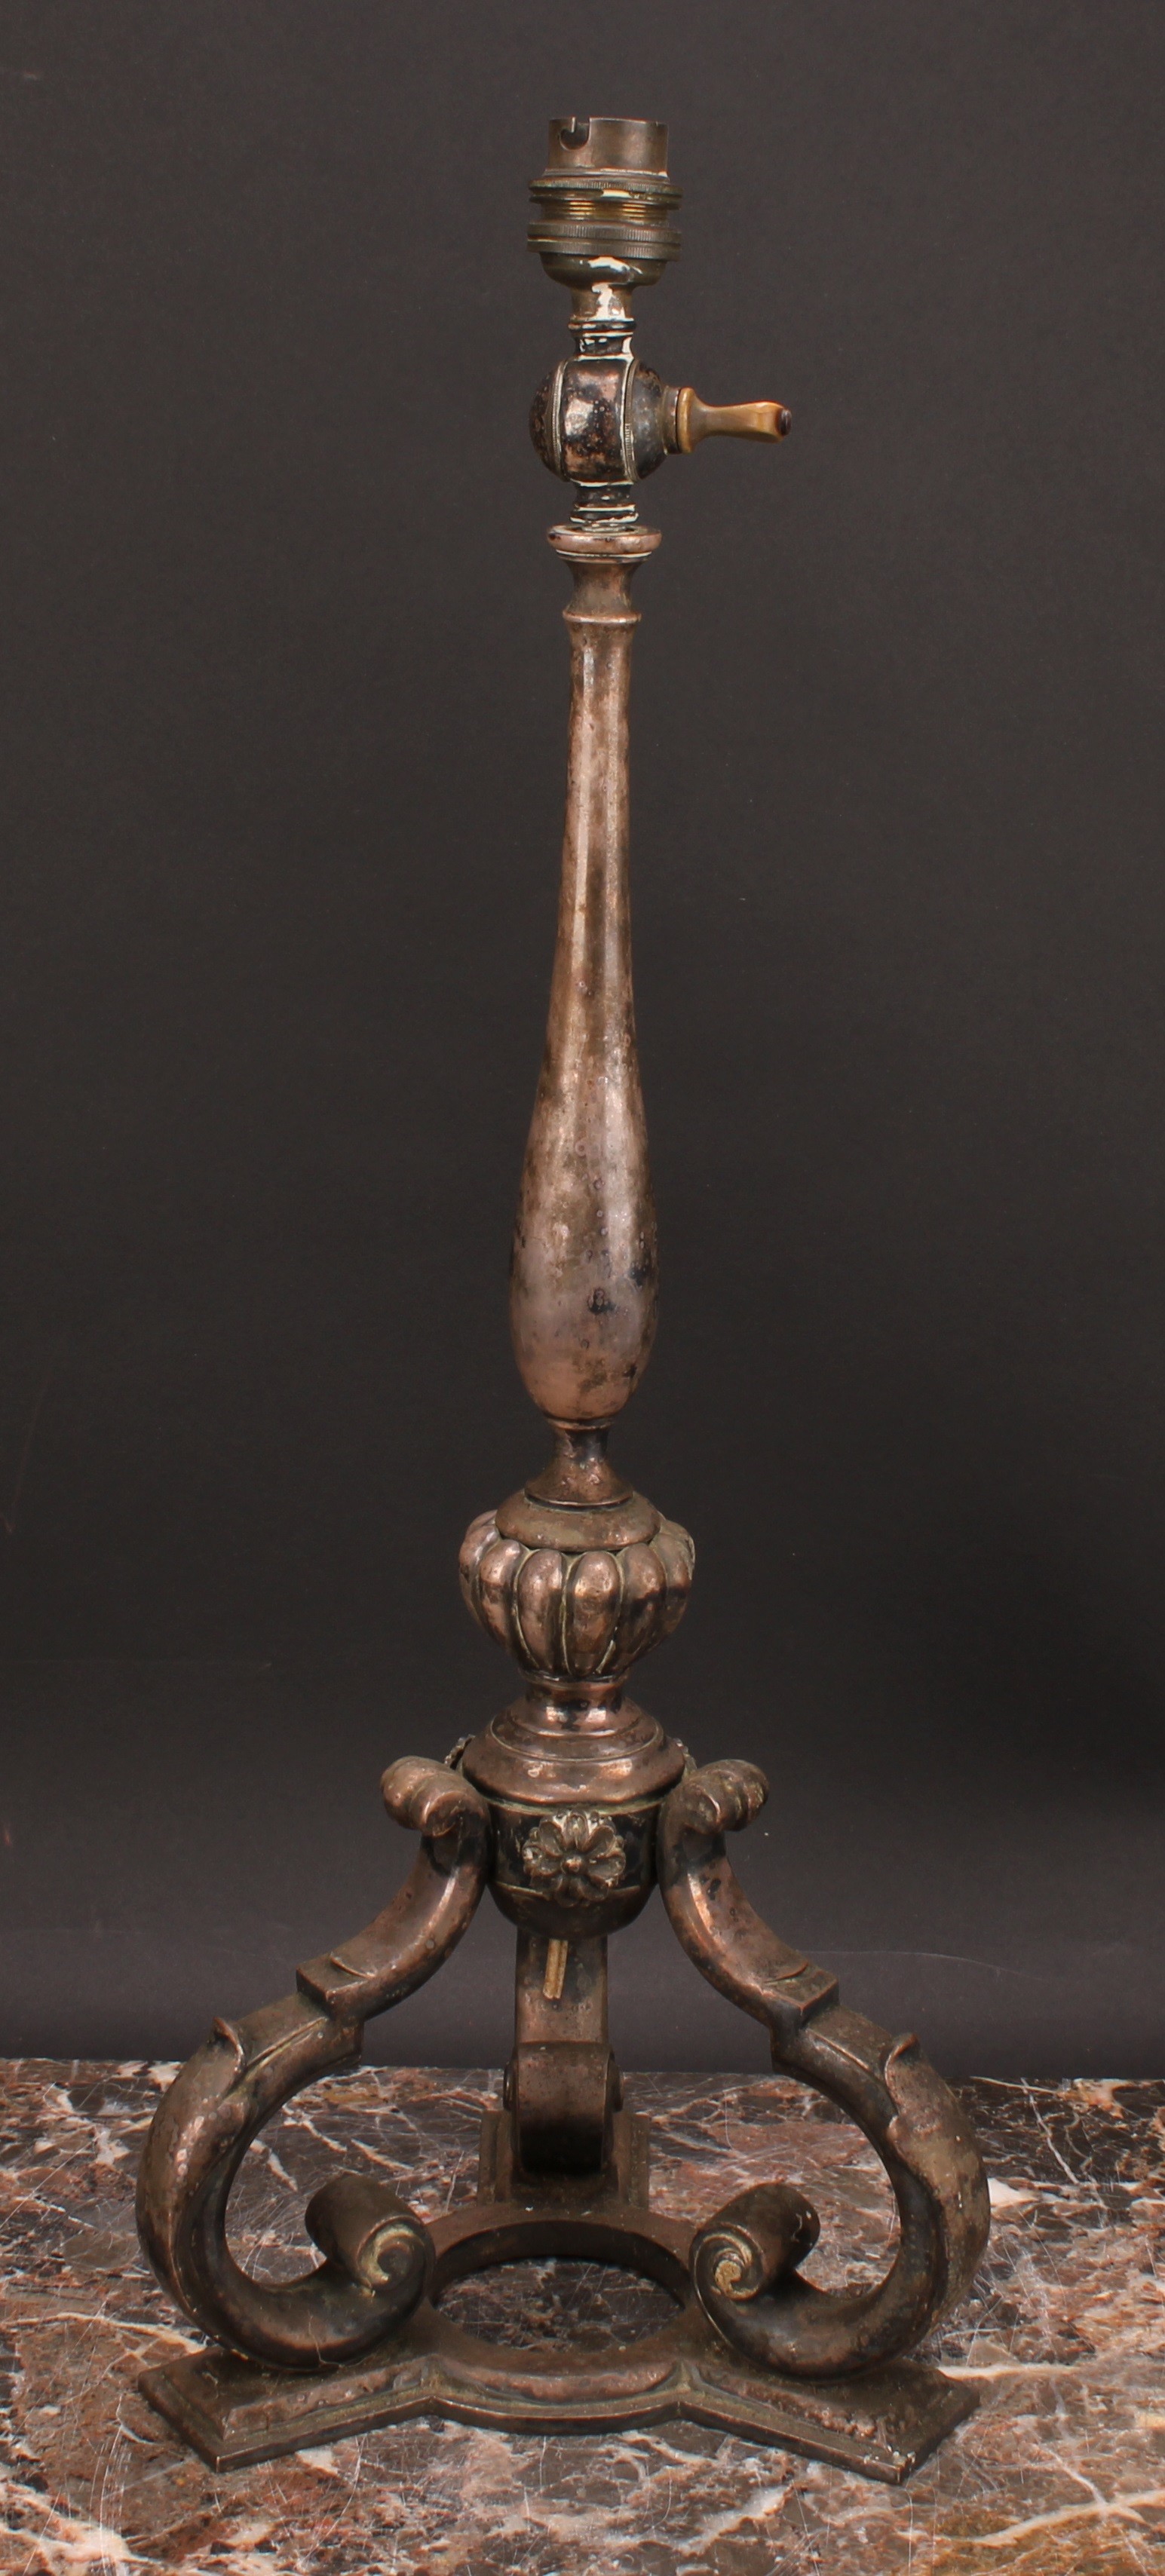 An early 20th century silver plated pullman lamp, designed for a railway carriage, articulated - Image 2 of 3